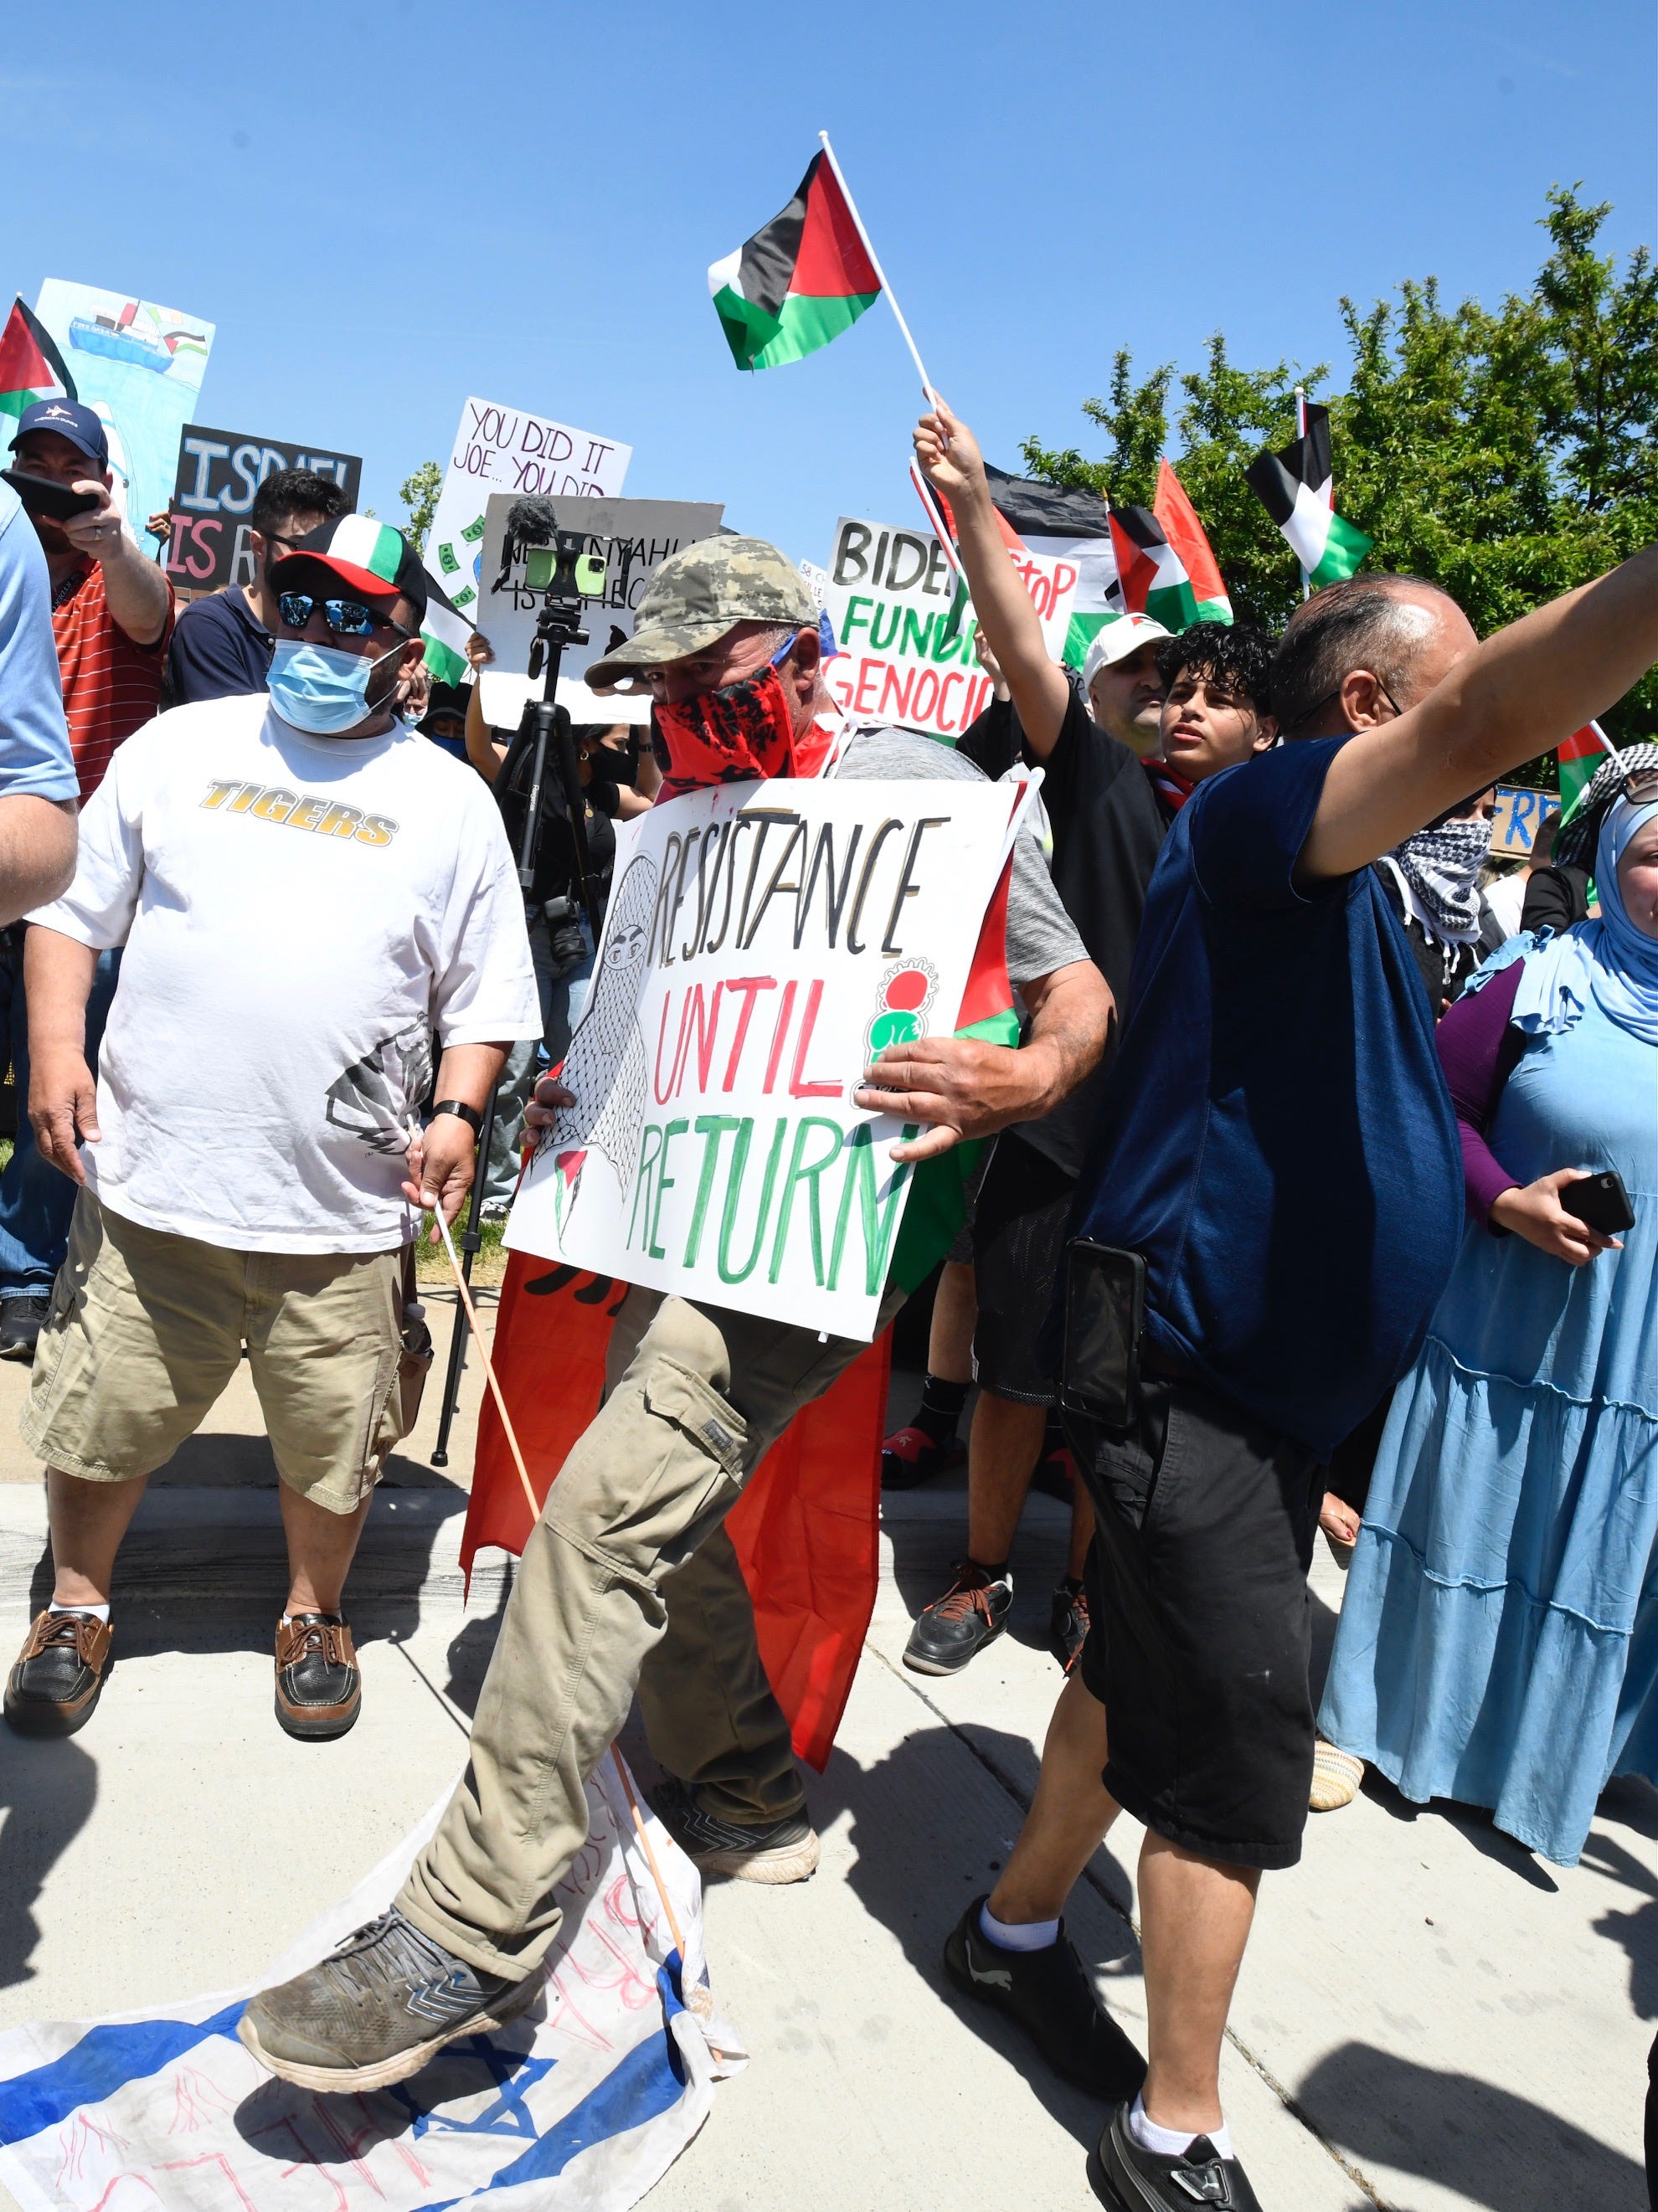 Palestinian protest in front of the Dearborn Police Department in Dearborn Michigan on May 18, 2021.